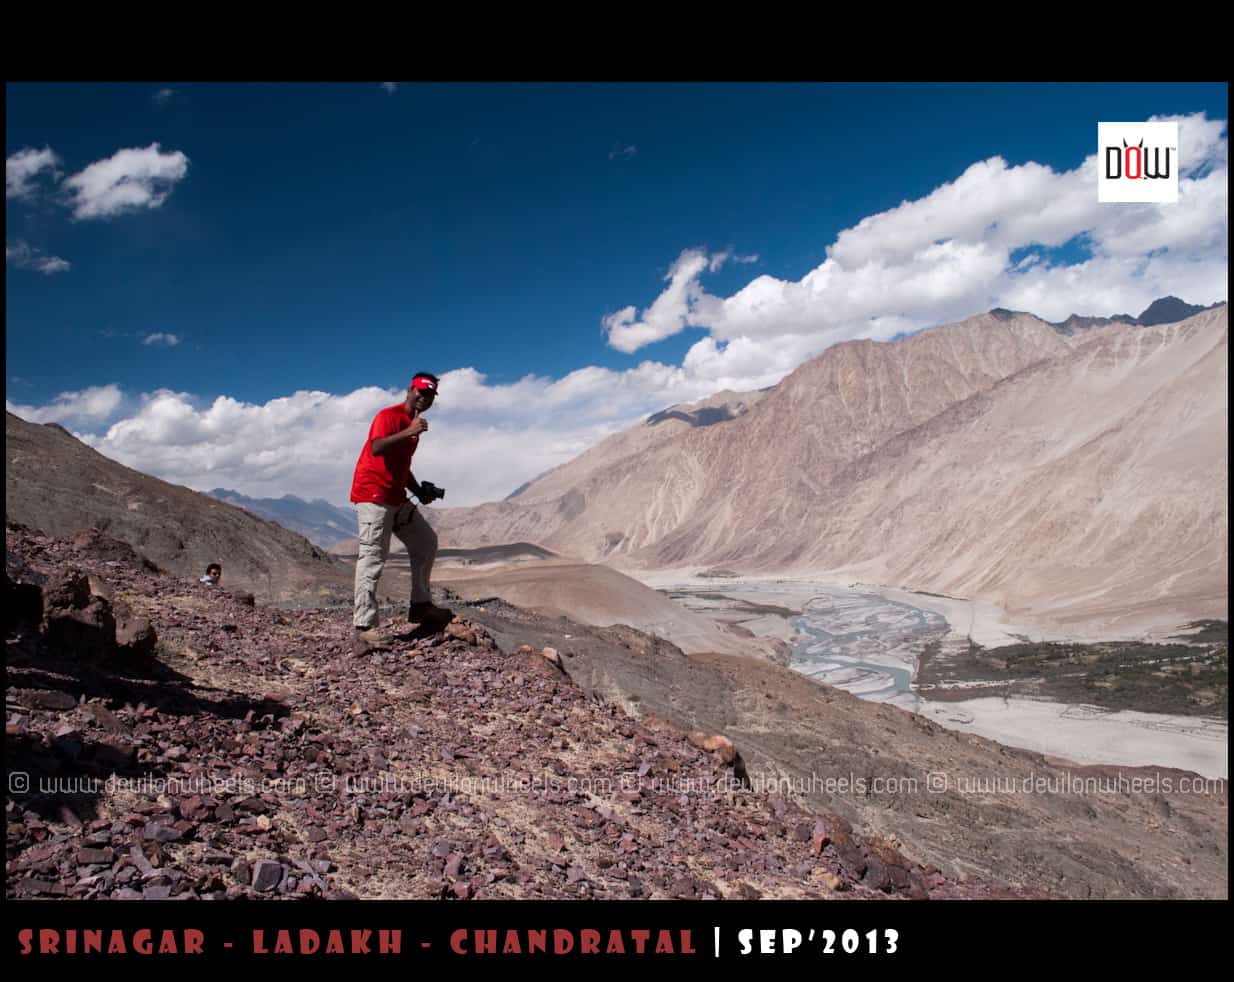 Shekhar, Thumb's Up for the magical views and this epic adventure